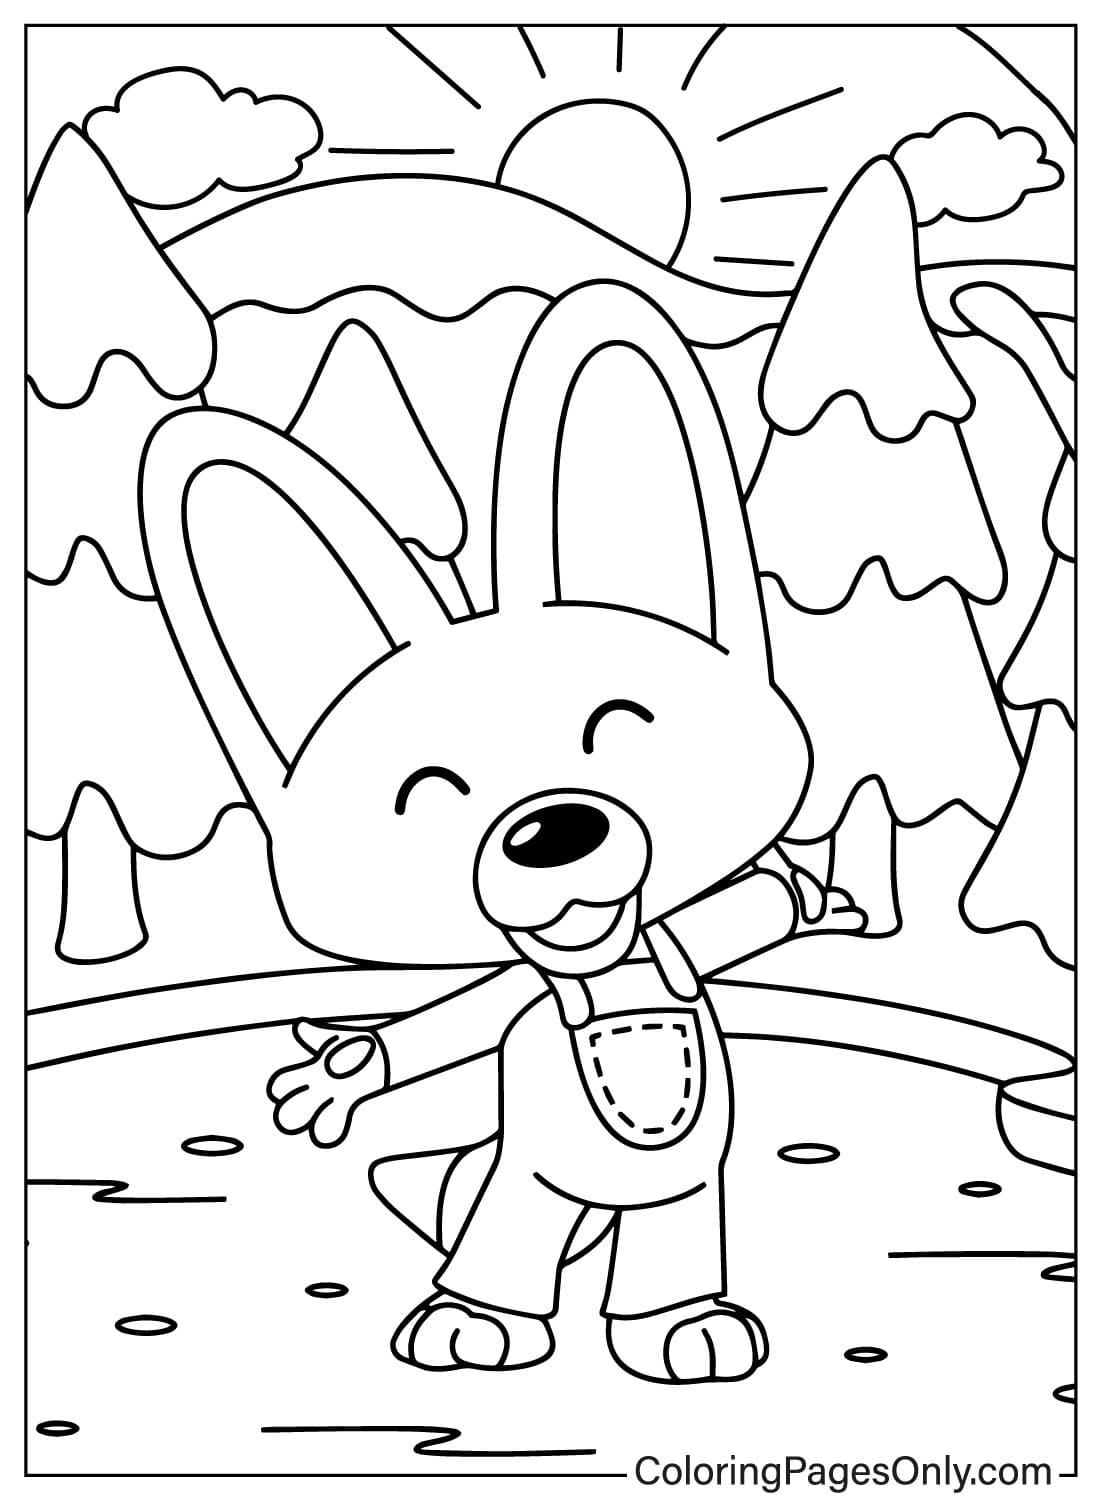 Eddy Free Coloring Page from Pororo the Little Penguin